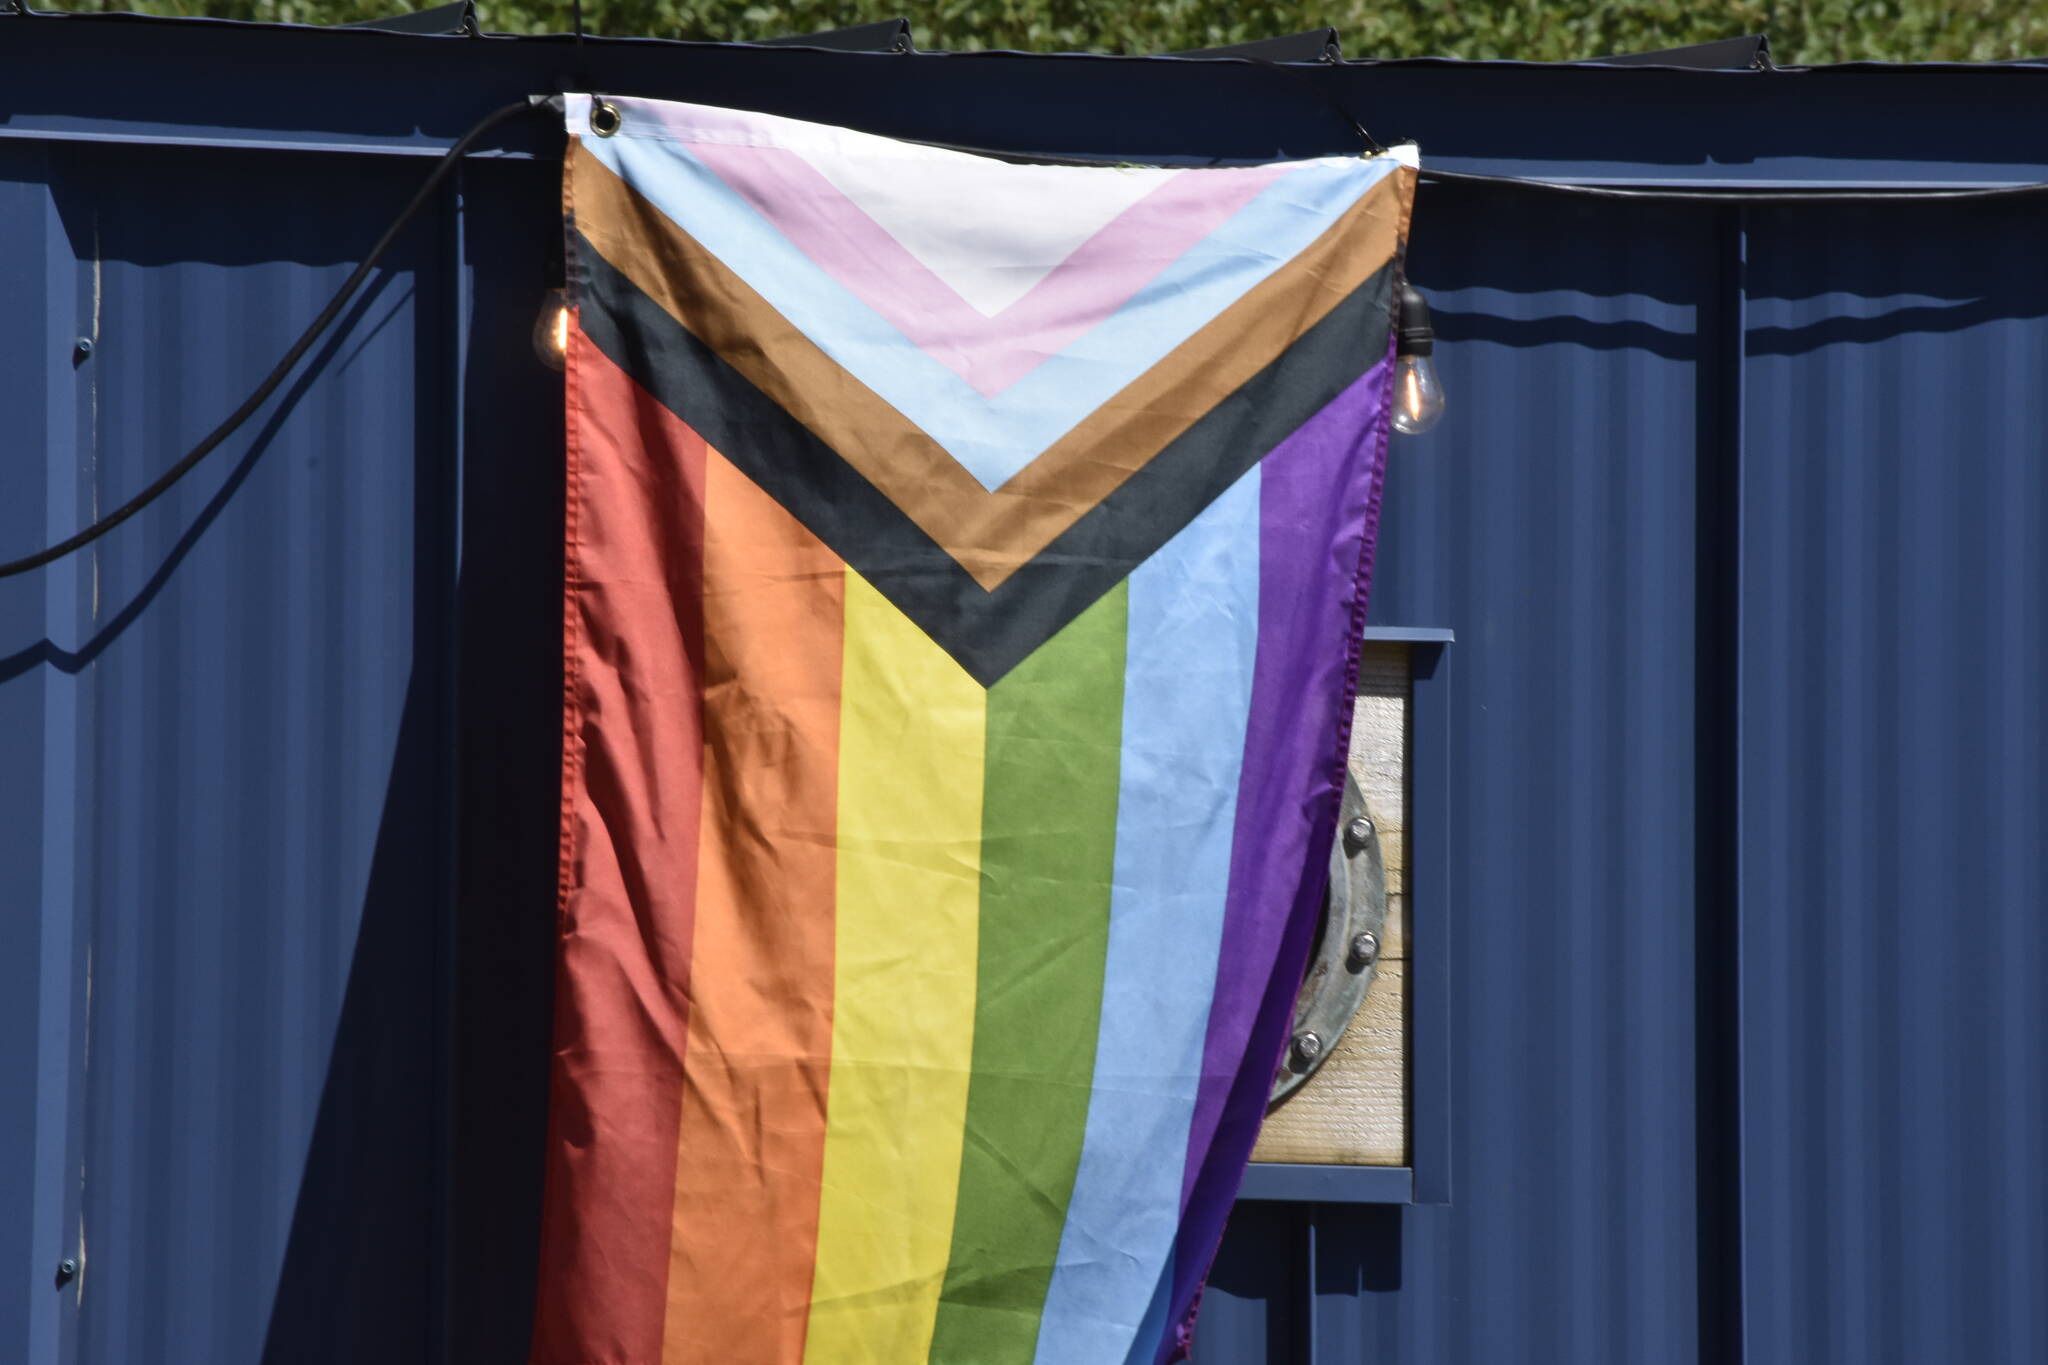 A Pride flag hangs in downtown Juneau on Thursday, June 2, 2022, in honor of June as Pride Month. A number of Juneau's Pride events are being sponsored by the National Alliance on Mental Illness Juneau, who say LGBTQ youth are at higher risk for depression and suicidal ideation. (Peter Segall / Juneau Empire)